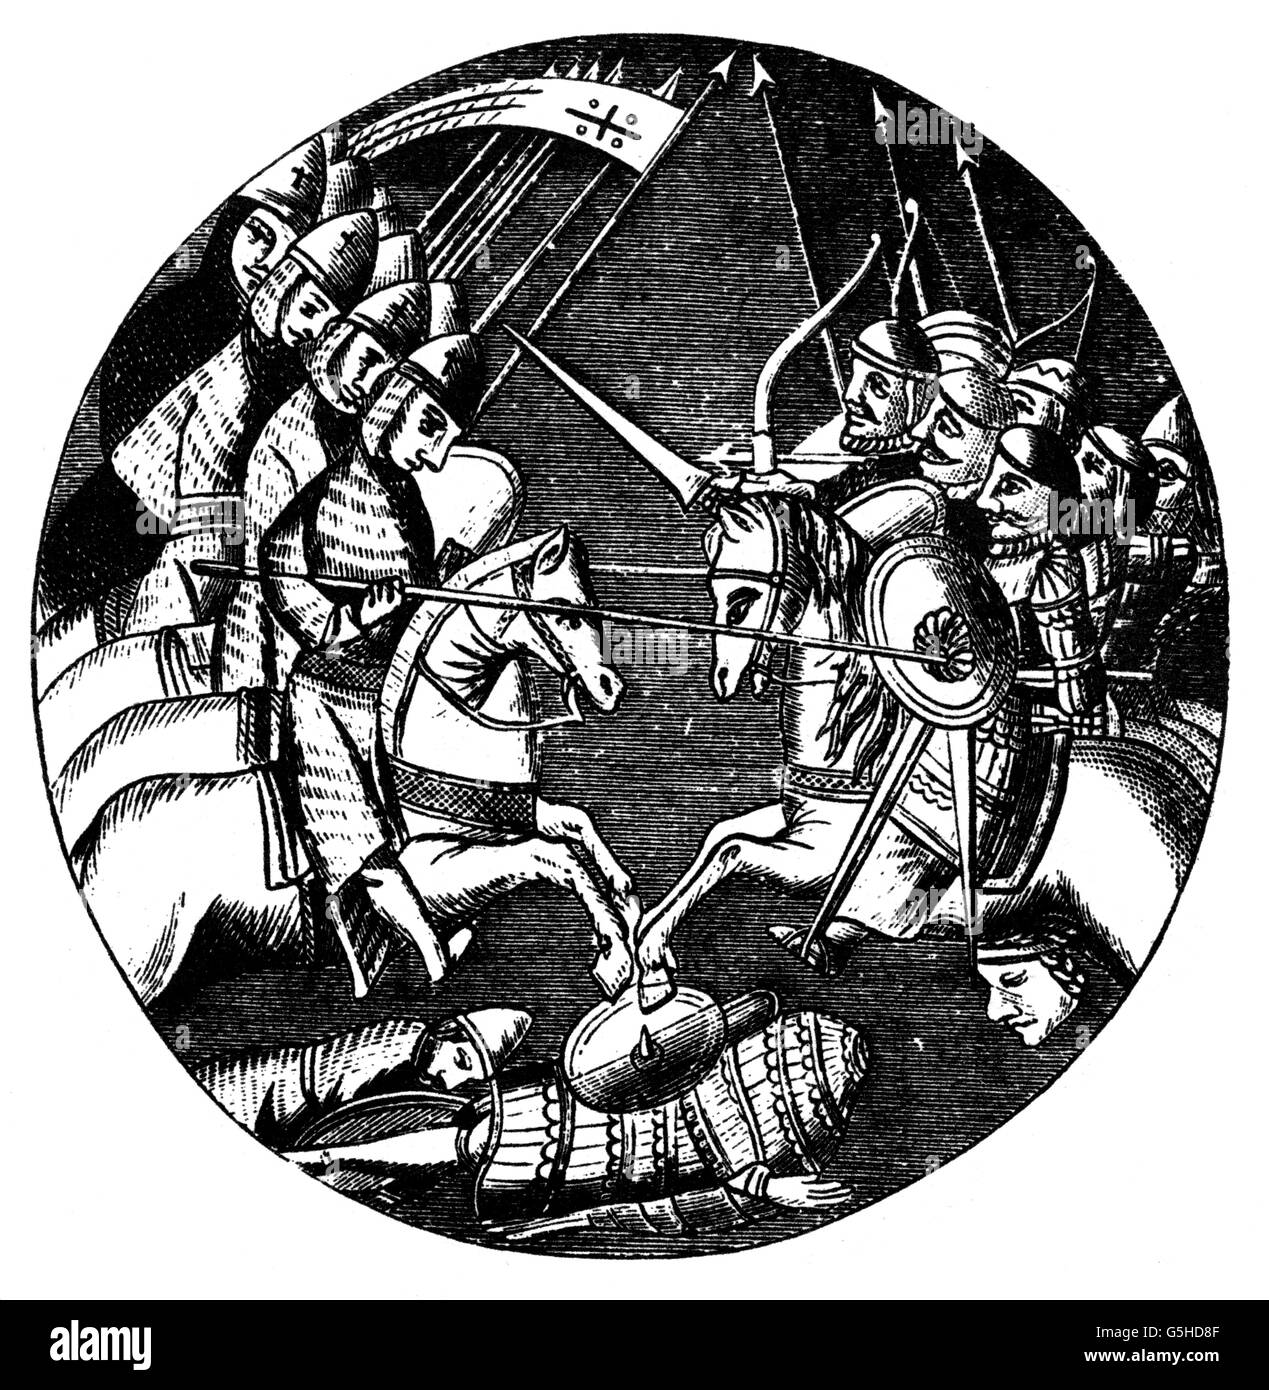 Middle Ages, crusades, battle between crusaders and Muslim cavalry, wood engraving, 19th century, after a glass painting in a French church, 11th century, warrior, warriors, war, wars, crusade, crusader, crusaders, knight, knights, fights, fighting, fight, battling, battle, rider, riders, cavalryman, cavalrymen, cavalry, cavalries, shield, shields, sword, swords, horse, horses, medieval, mediaeval, military, historic, historical, flag, people, Additional-Rights-Clearences-Not Available Stock Photo